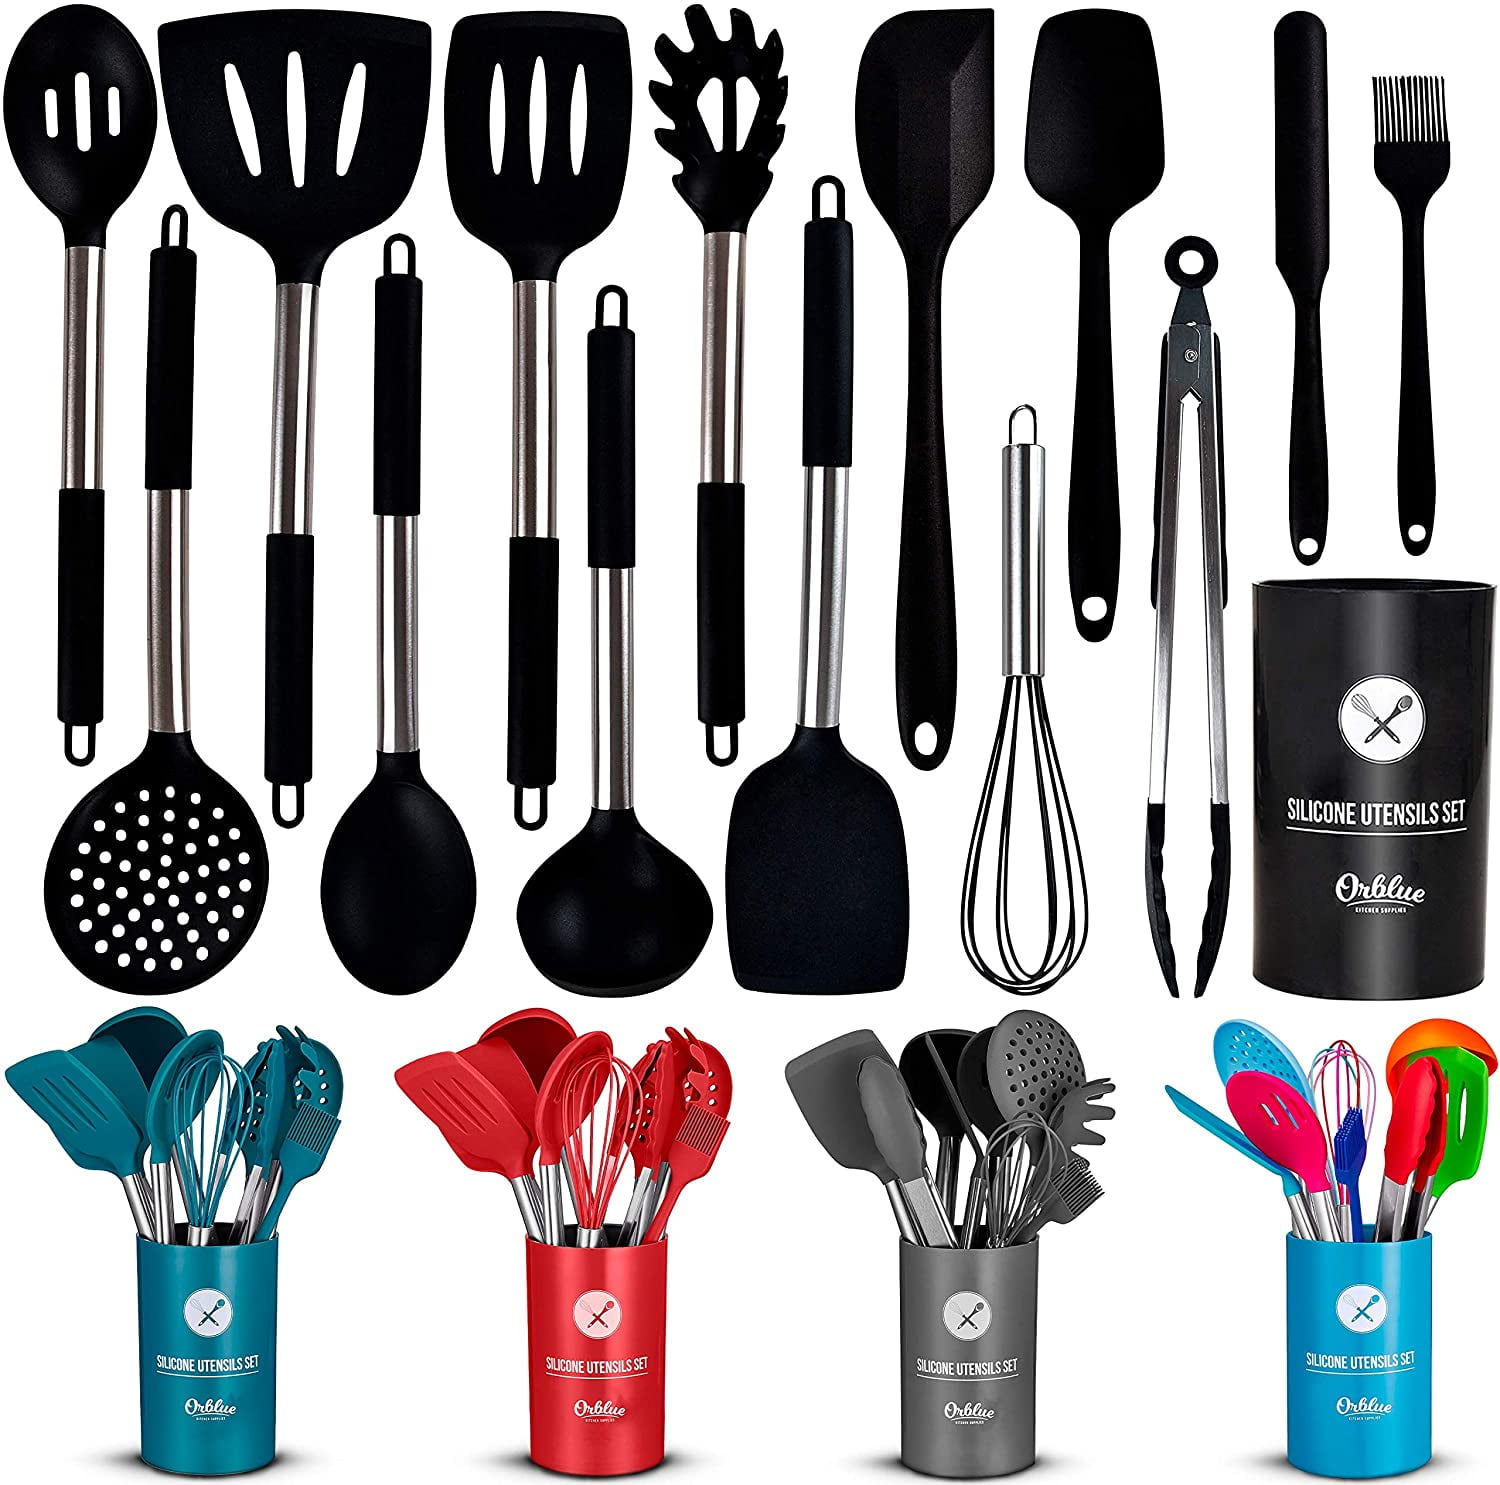 Safe Food-Grade Silicone Heads and Stainless Steel Handles with Heat-Proof Silicone Handle Covers 14-Piece Kitchen Utensils with Holder Blue ORBLUE Silicone Cooking Utensil Set 